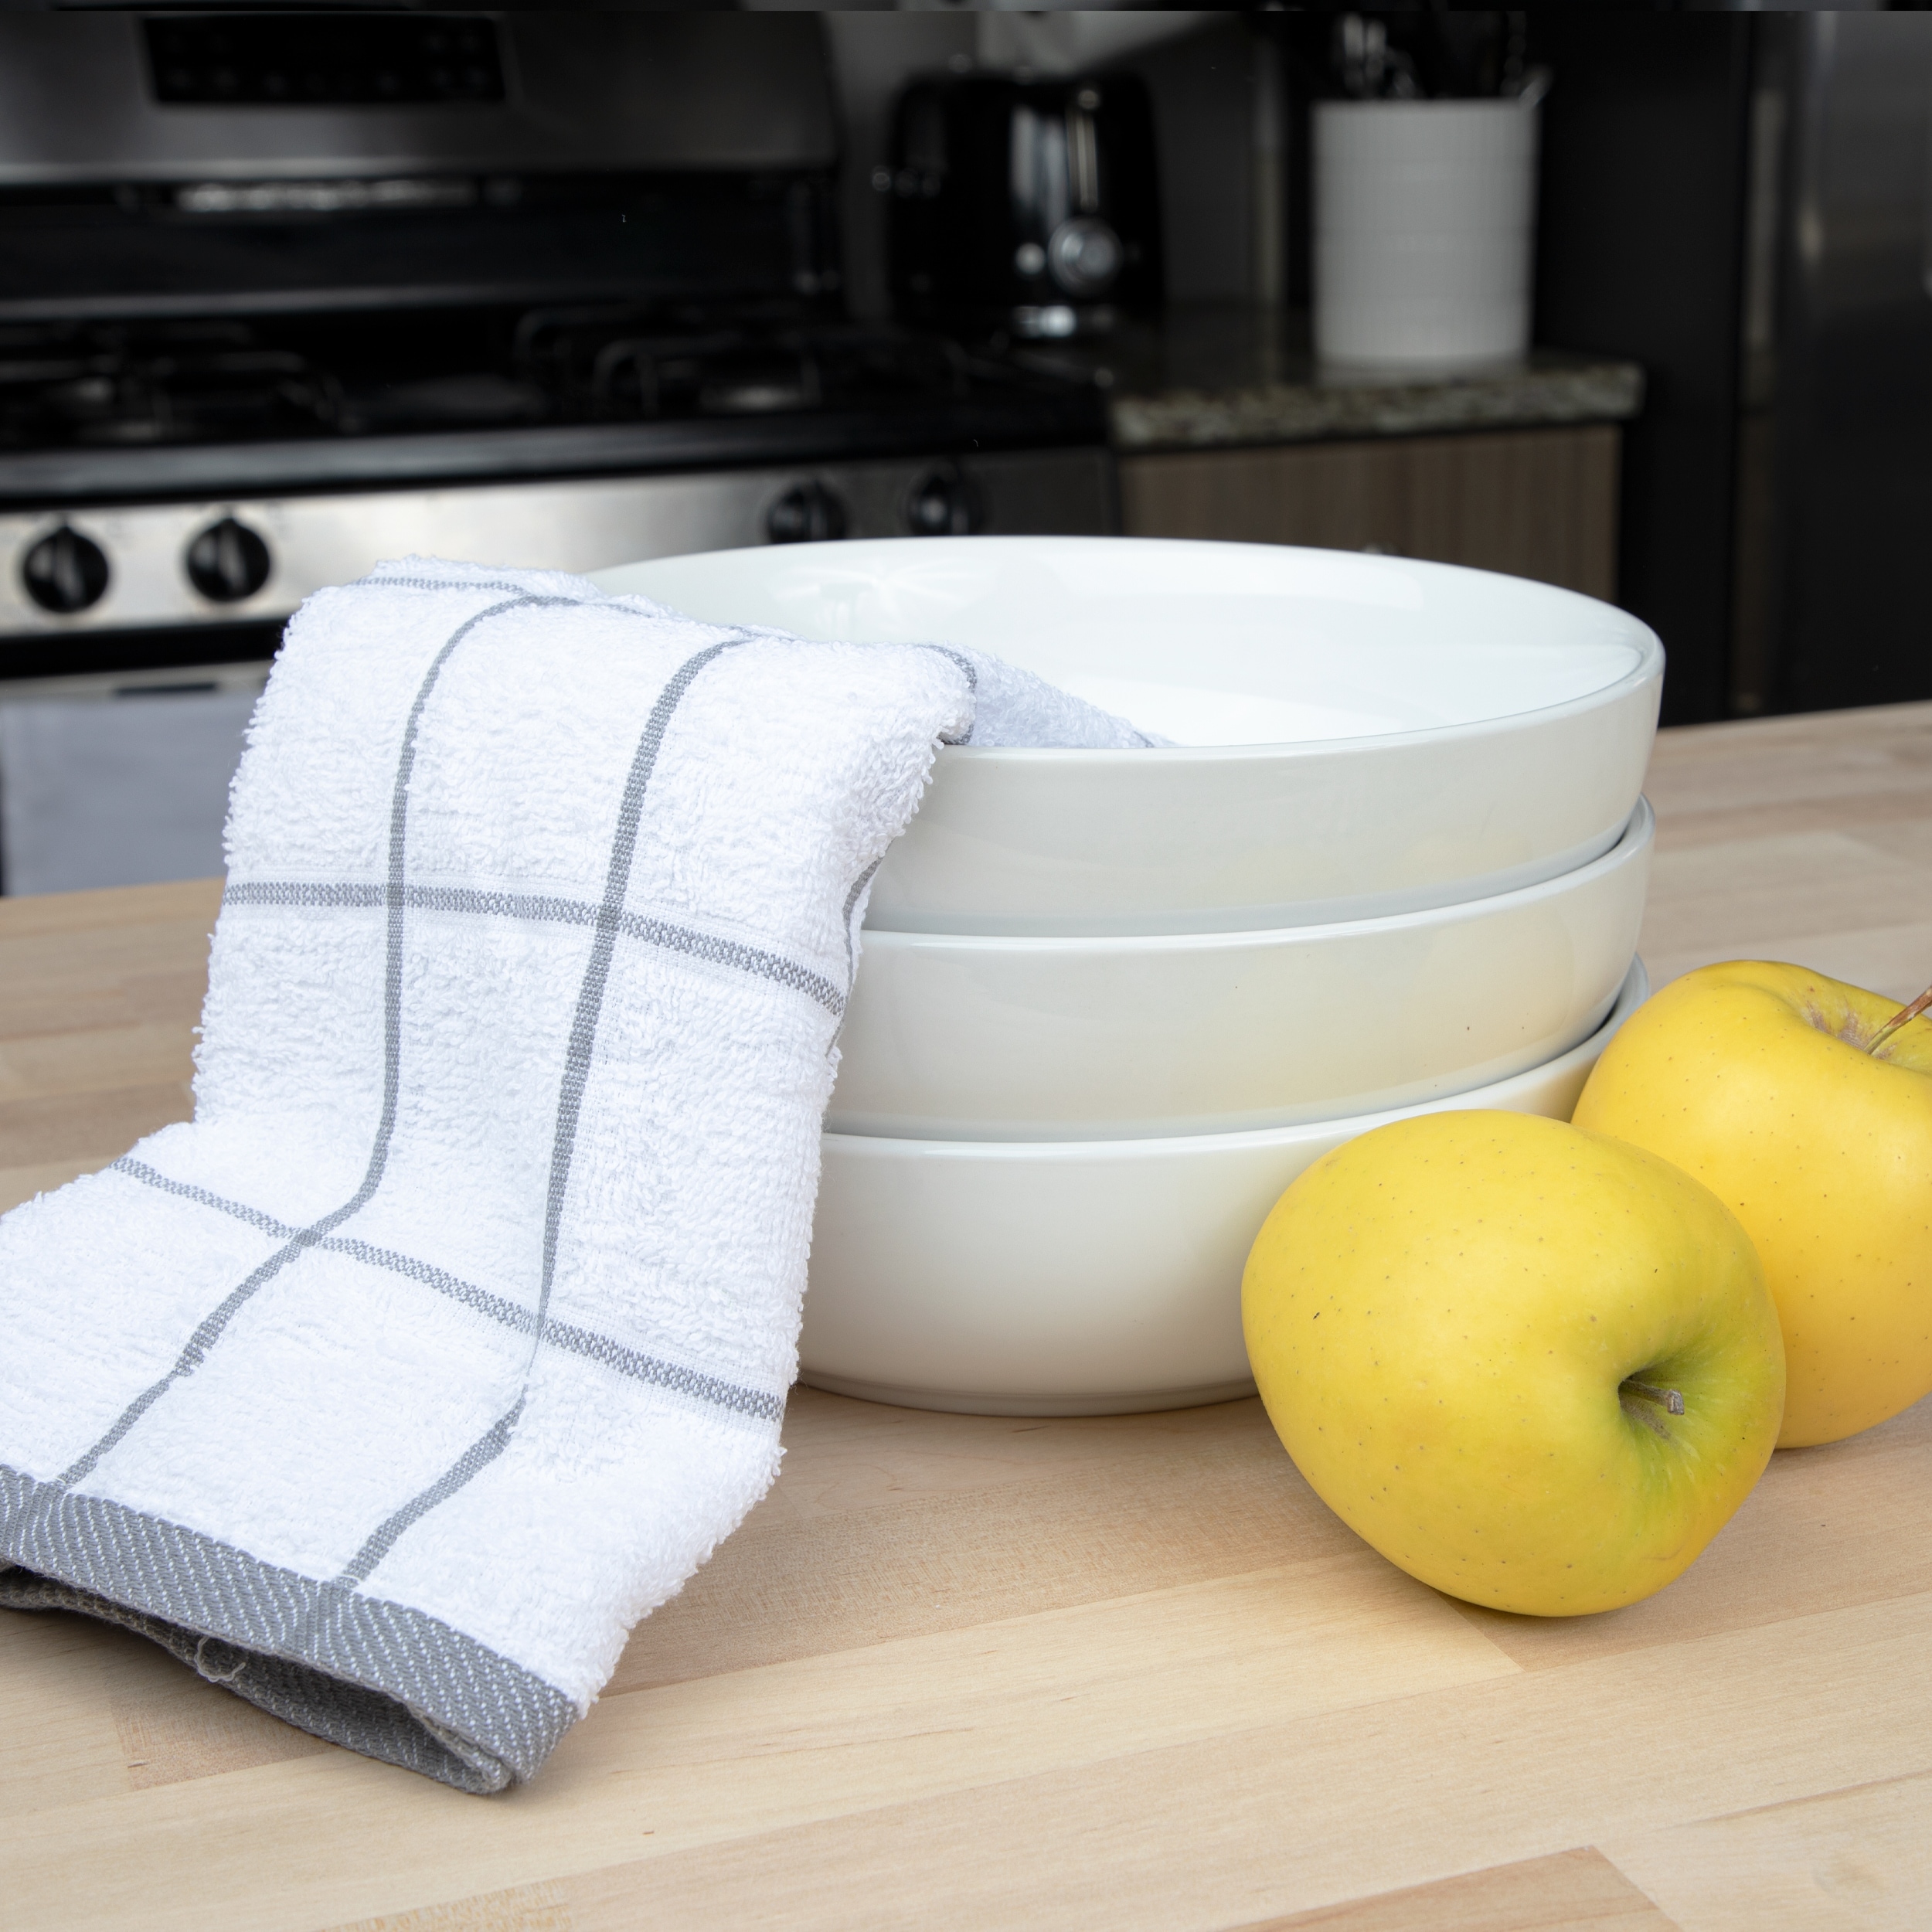 https://ak1.ostkcdn.com/images/products/is/images/direct/71d4dca7565229274341dc2a1824492b94f60a2a/Cooks-Linen-Kitchen-Towels---12-Pack.jpg